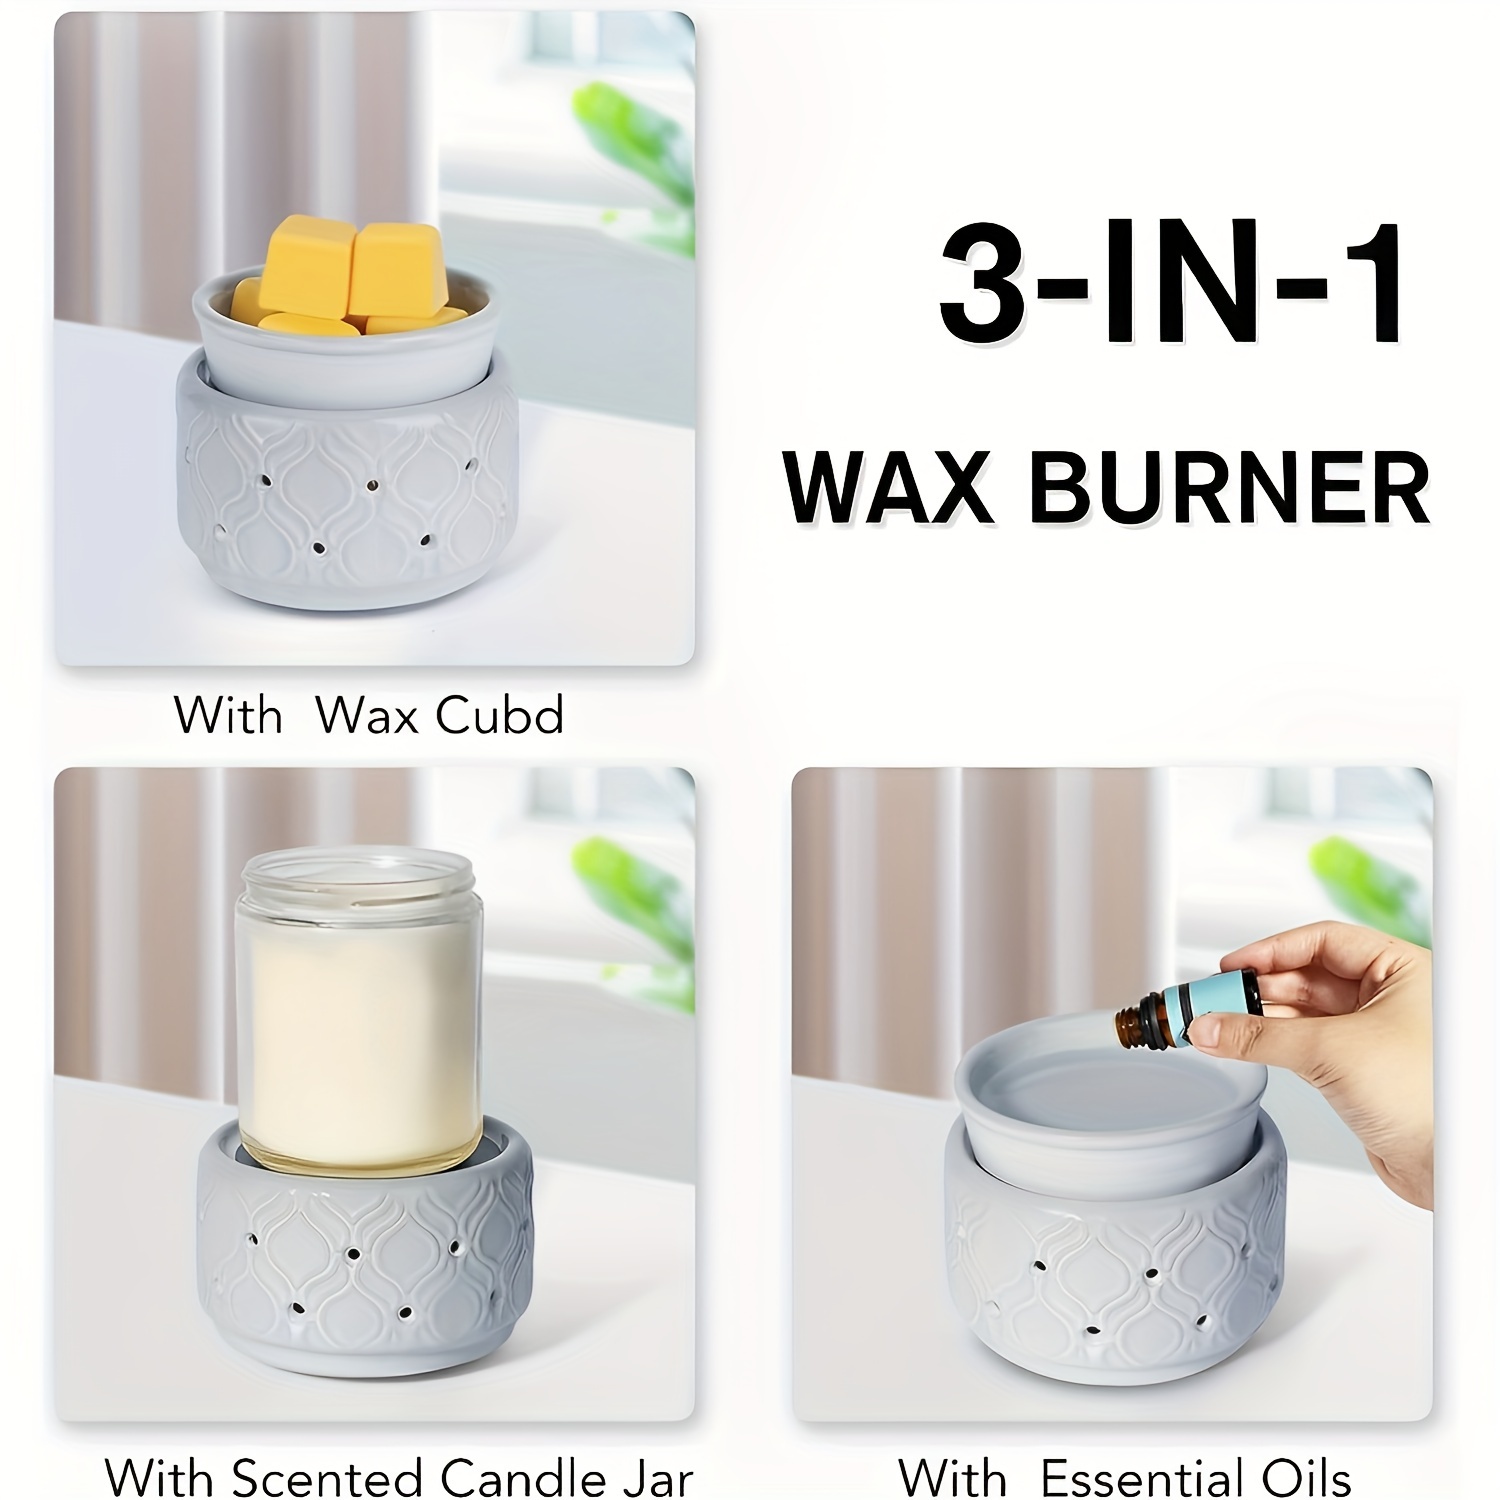 Addison Electric Wax Melts Warmer with Light - Wax Warmers